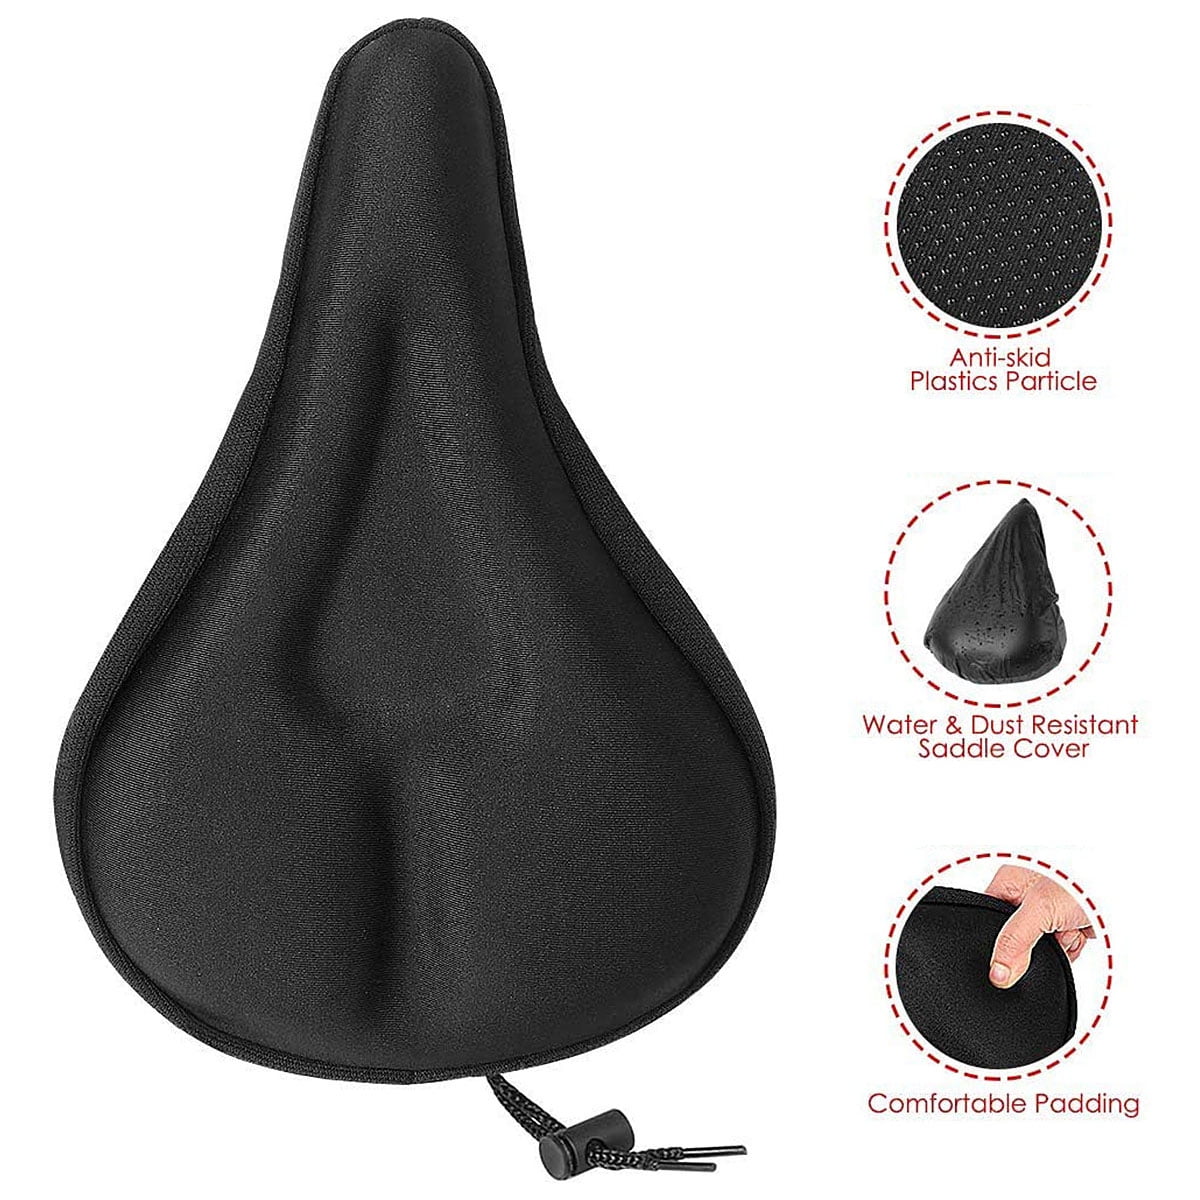 RQWEIN Bicycle Seat Cushion Cover-Soft Extra Silica Gel and Foam Bike Saddle Cushion,Spinning with Waterproof & Dustproof Cover for Mens & Womens 